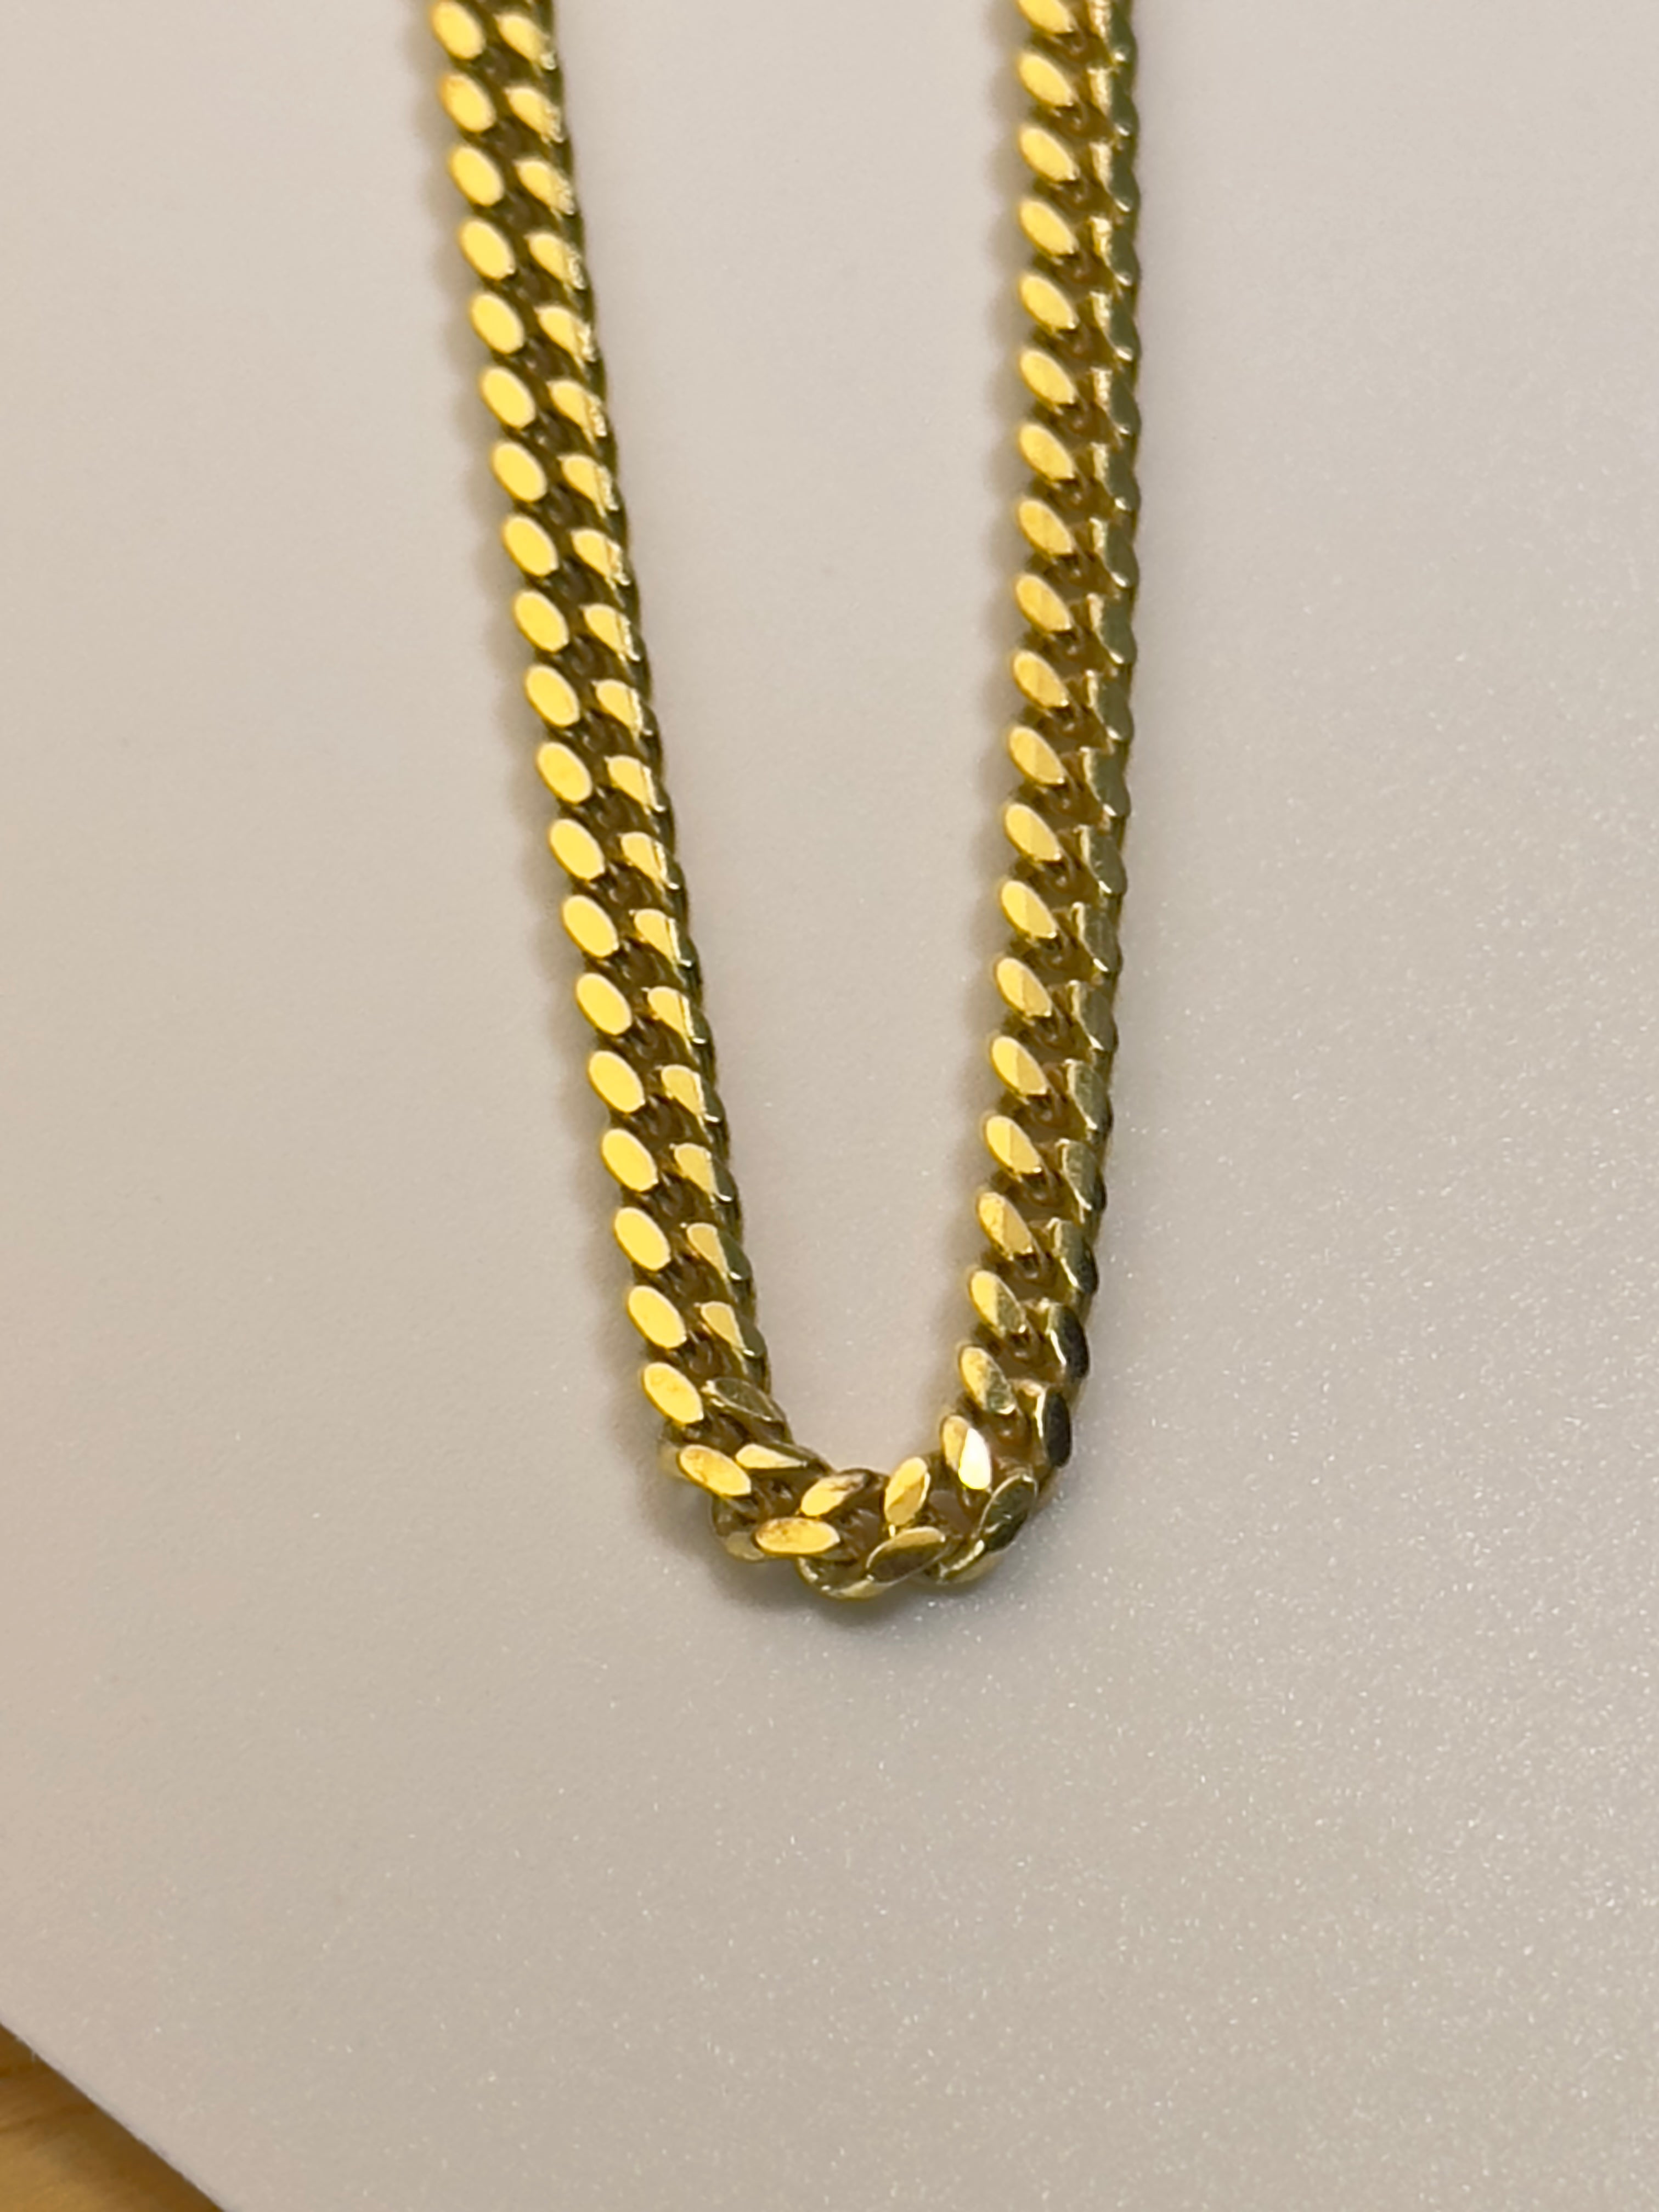 DR1661 - 925 Sterling Silver,14K YG Bonded - Men's Gold Chains - Miami Cuban